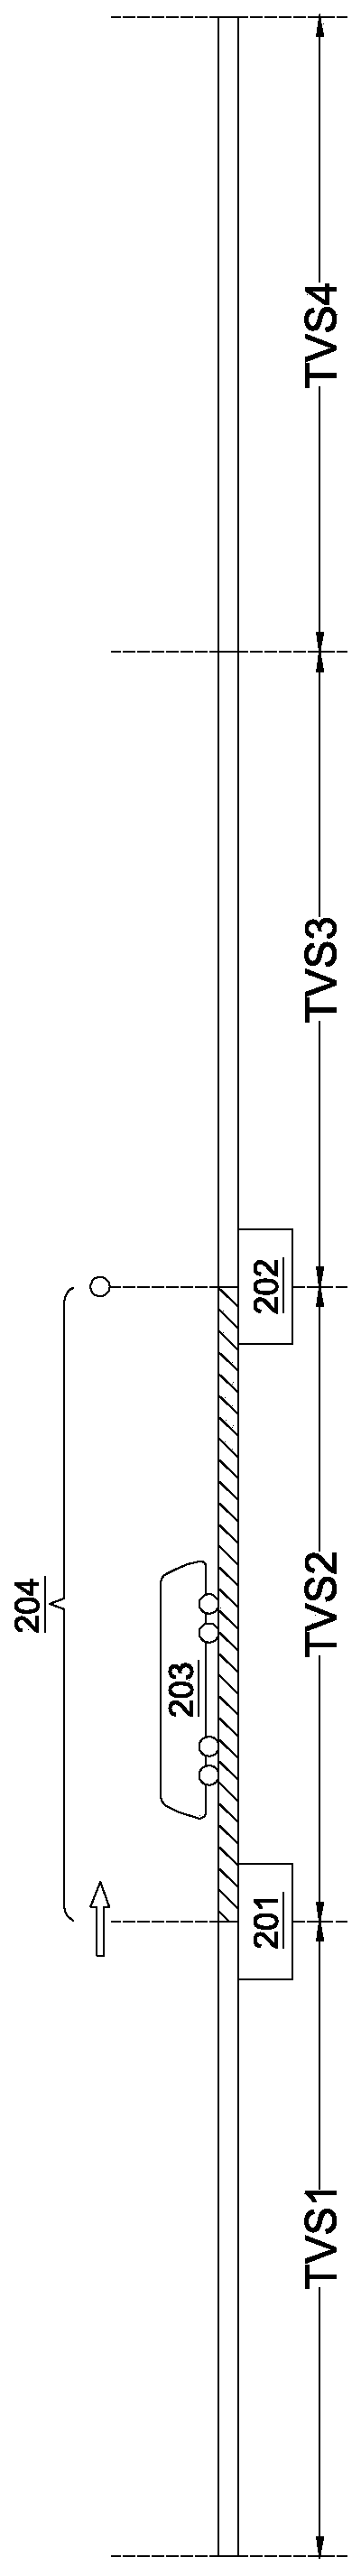 Train tracking method and device